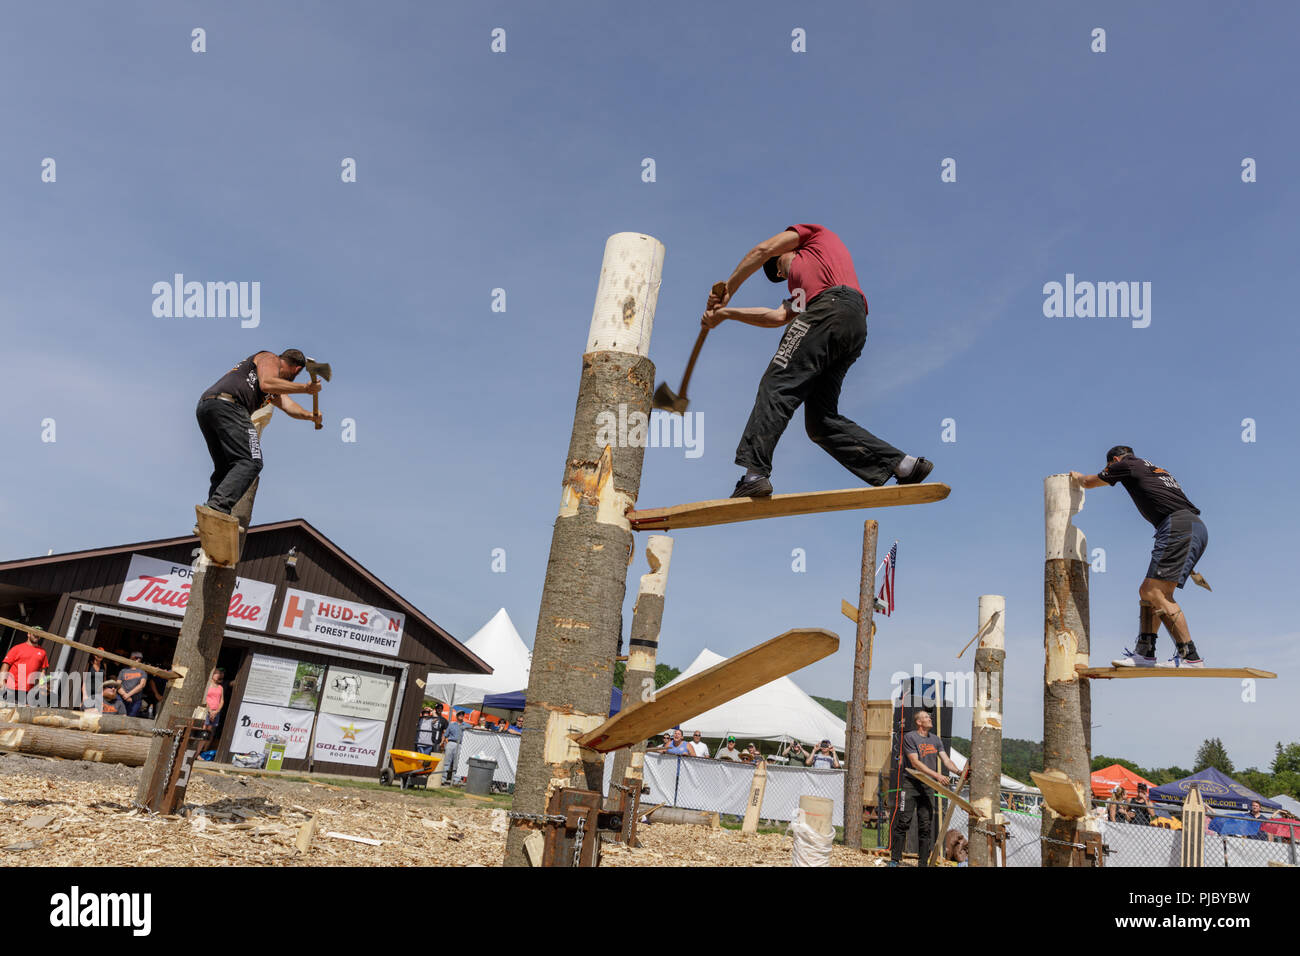 Men compete in lumberjack competition, Cherry Valley Outdoor Games, Otsego County, New York State. Stock Photo